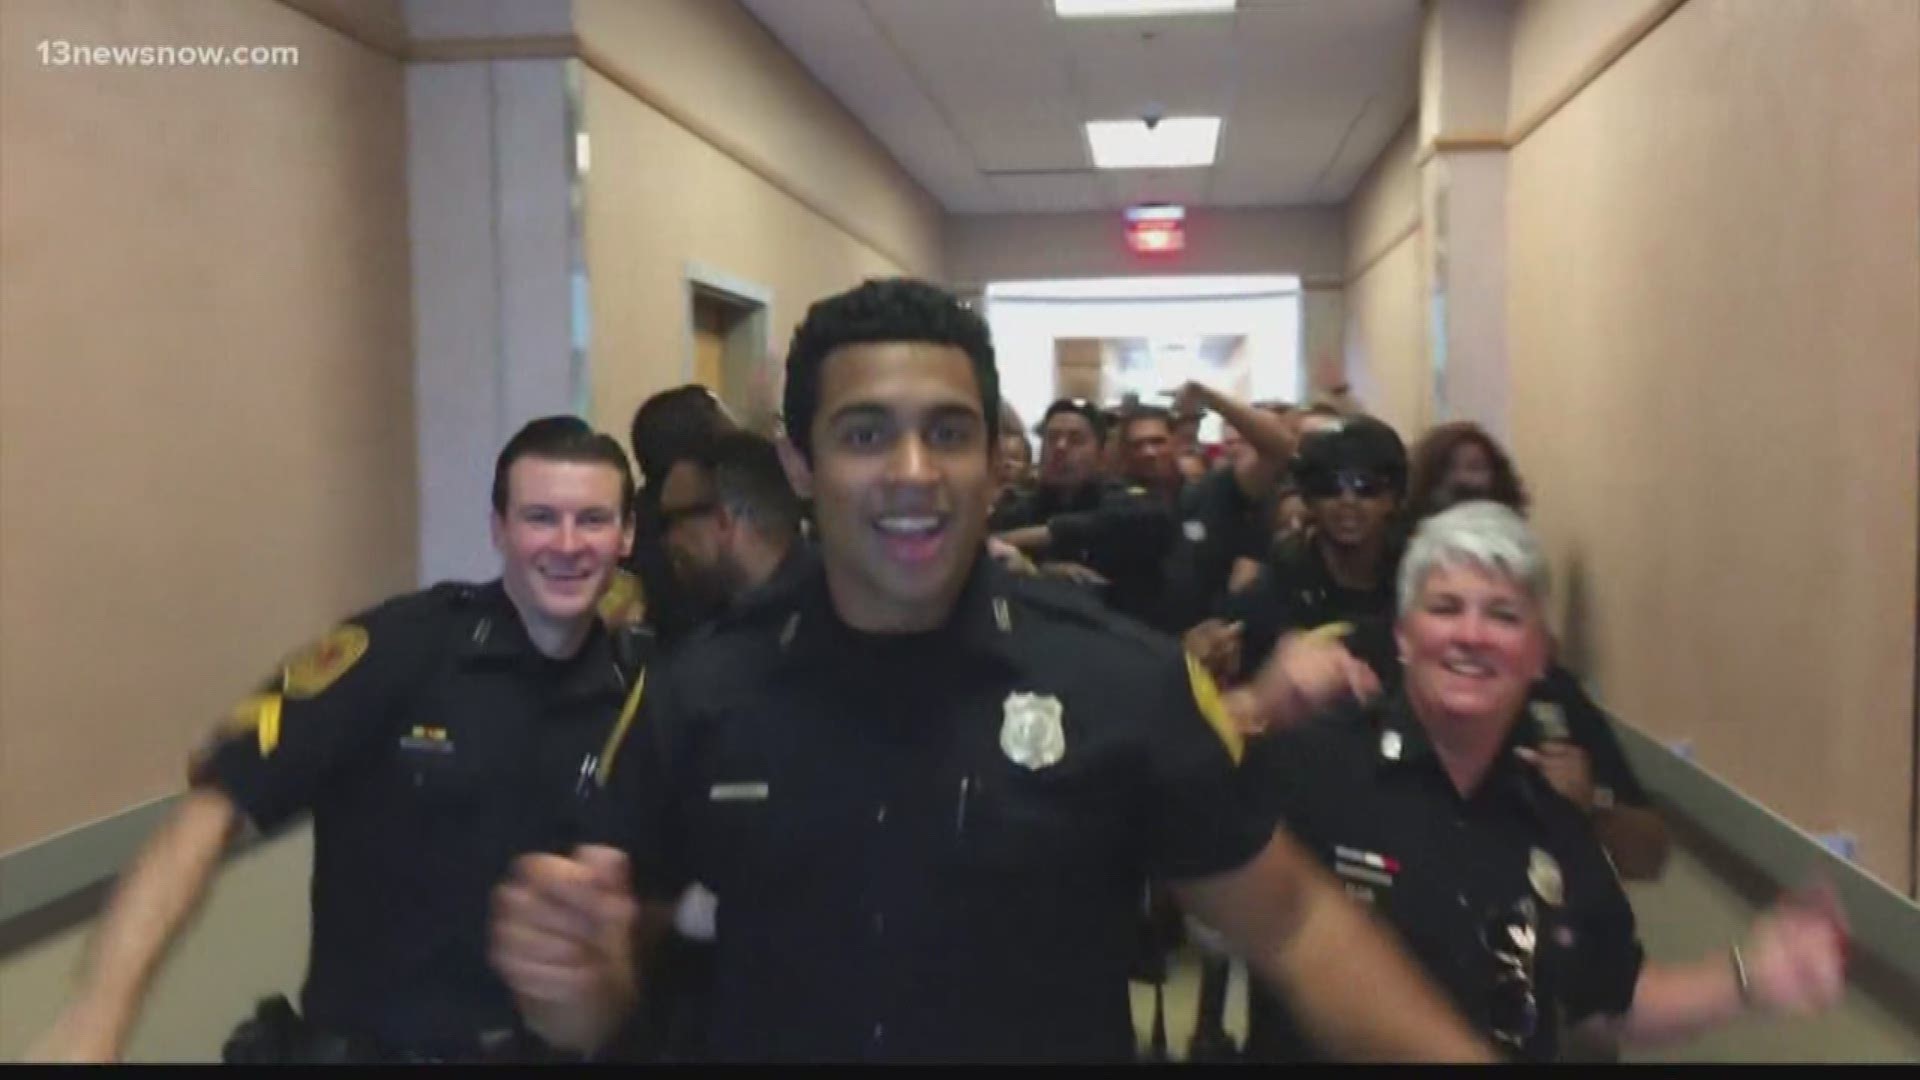 In only a day, the Norfolk Police Department has more than 22 million views on their LipSycn Challenge video!